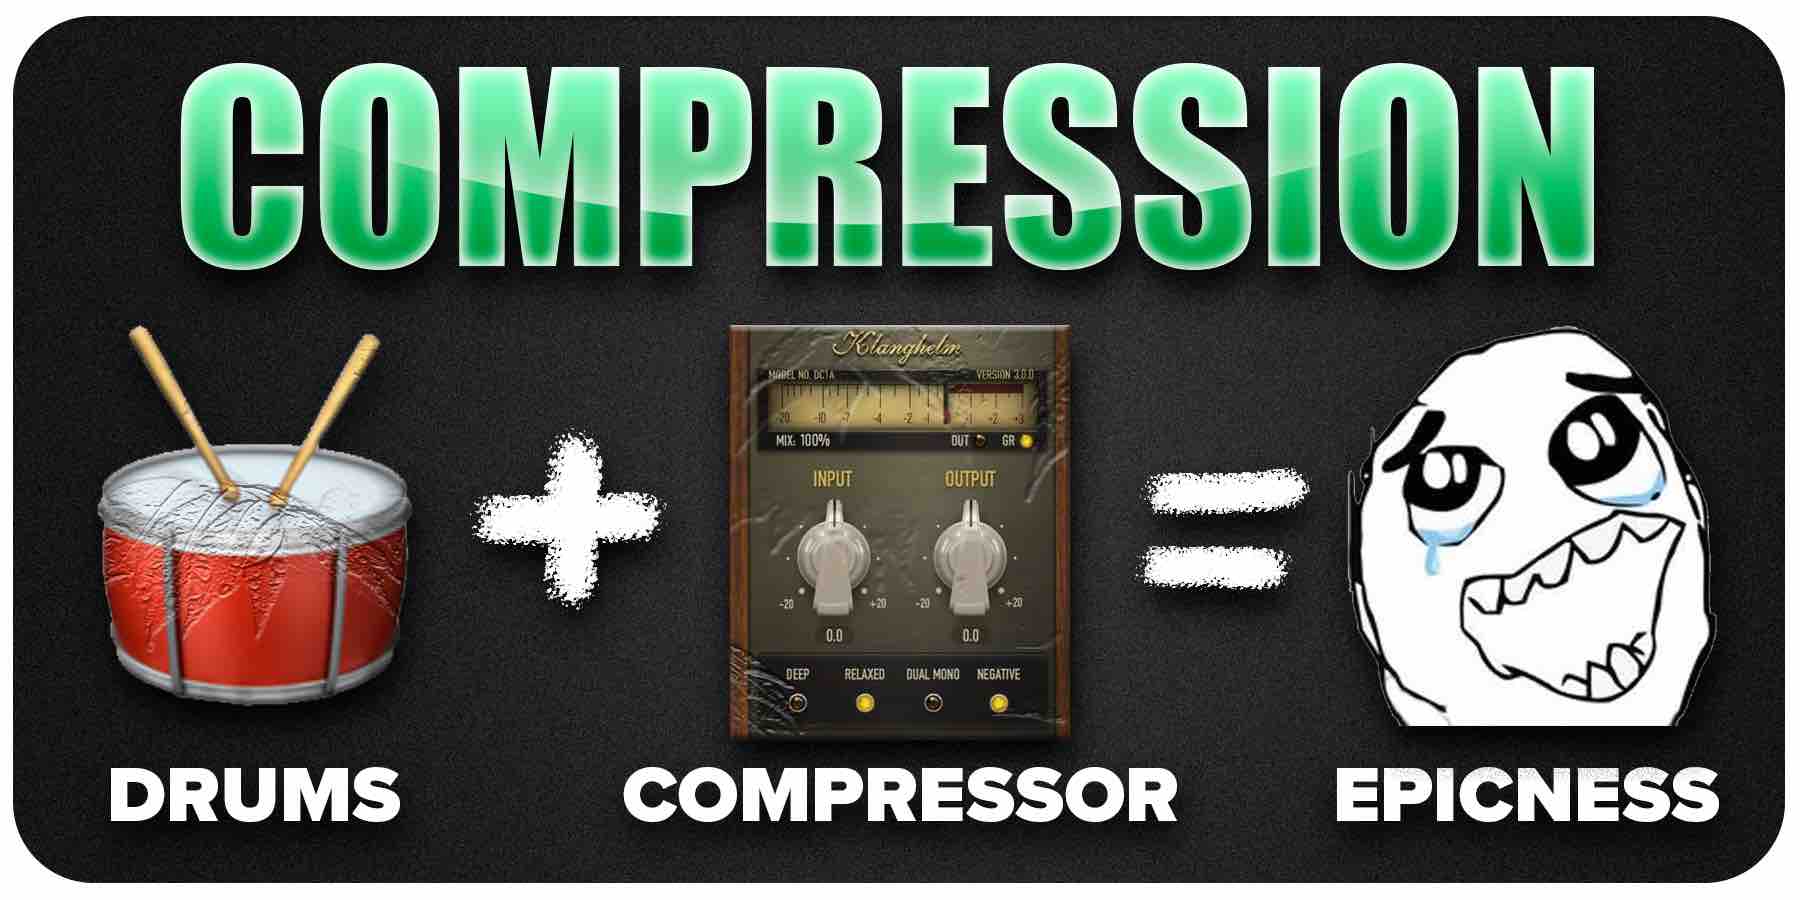 How to Add Compression to Drums